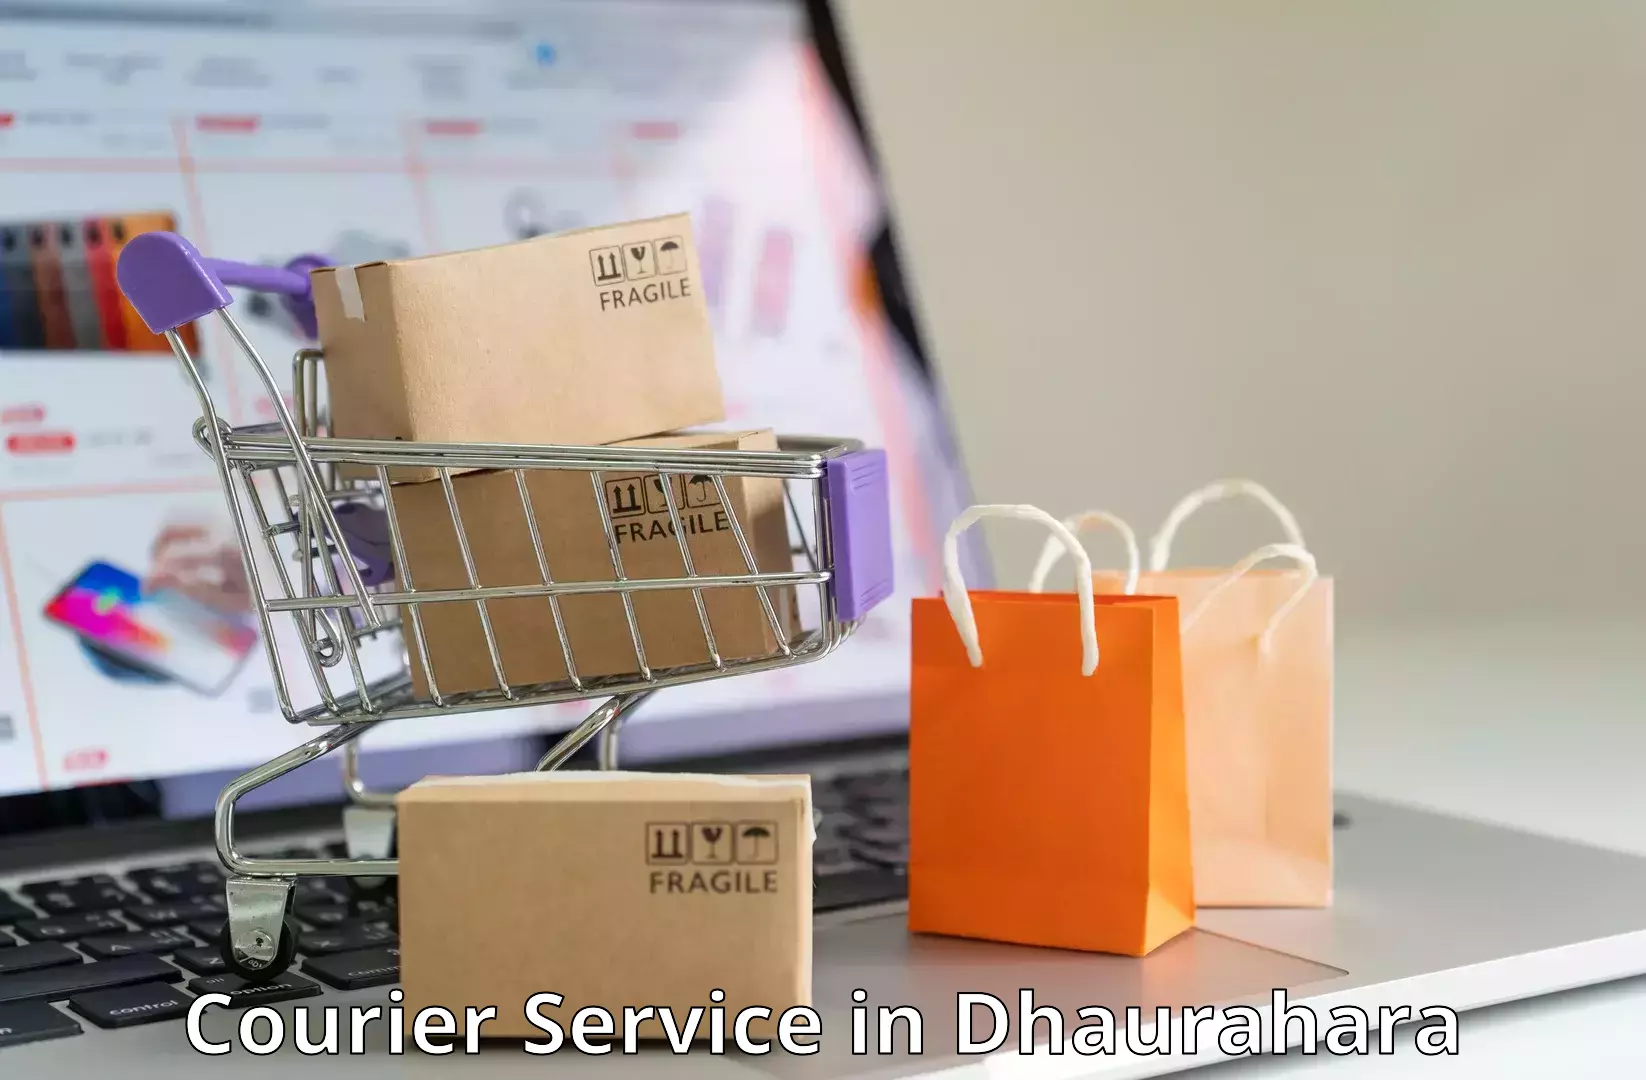 Flexible delivery scheduling in Dhaurahara